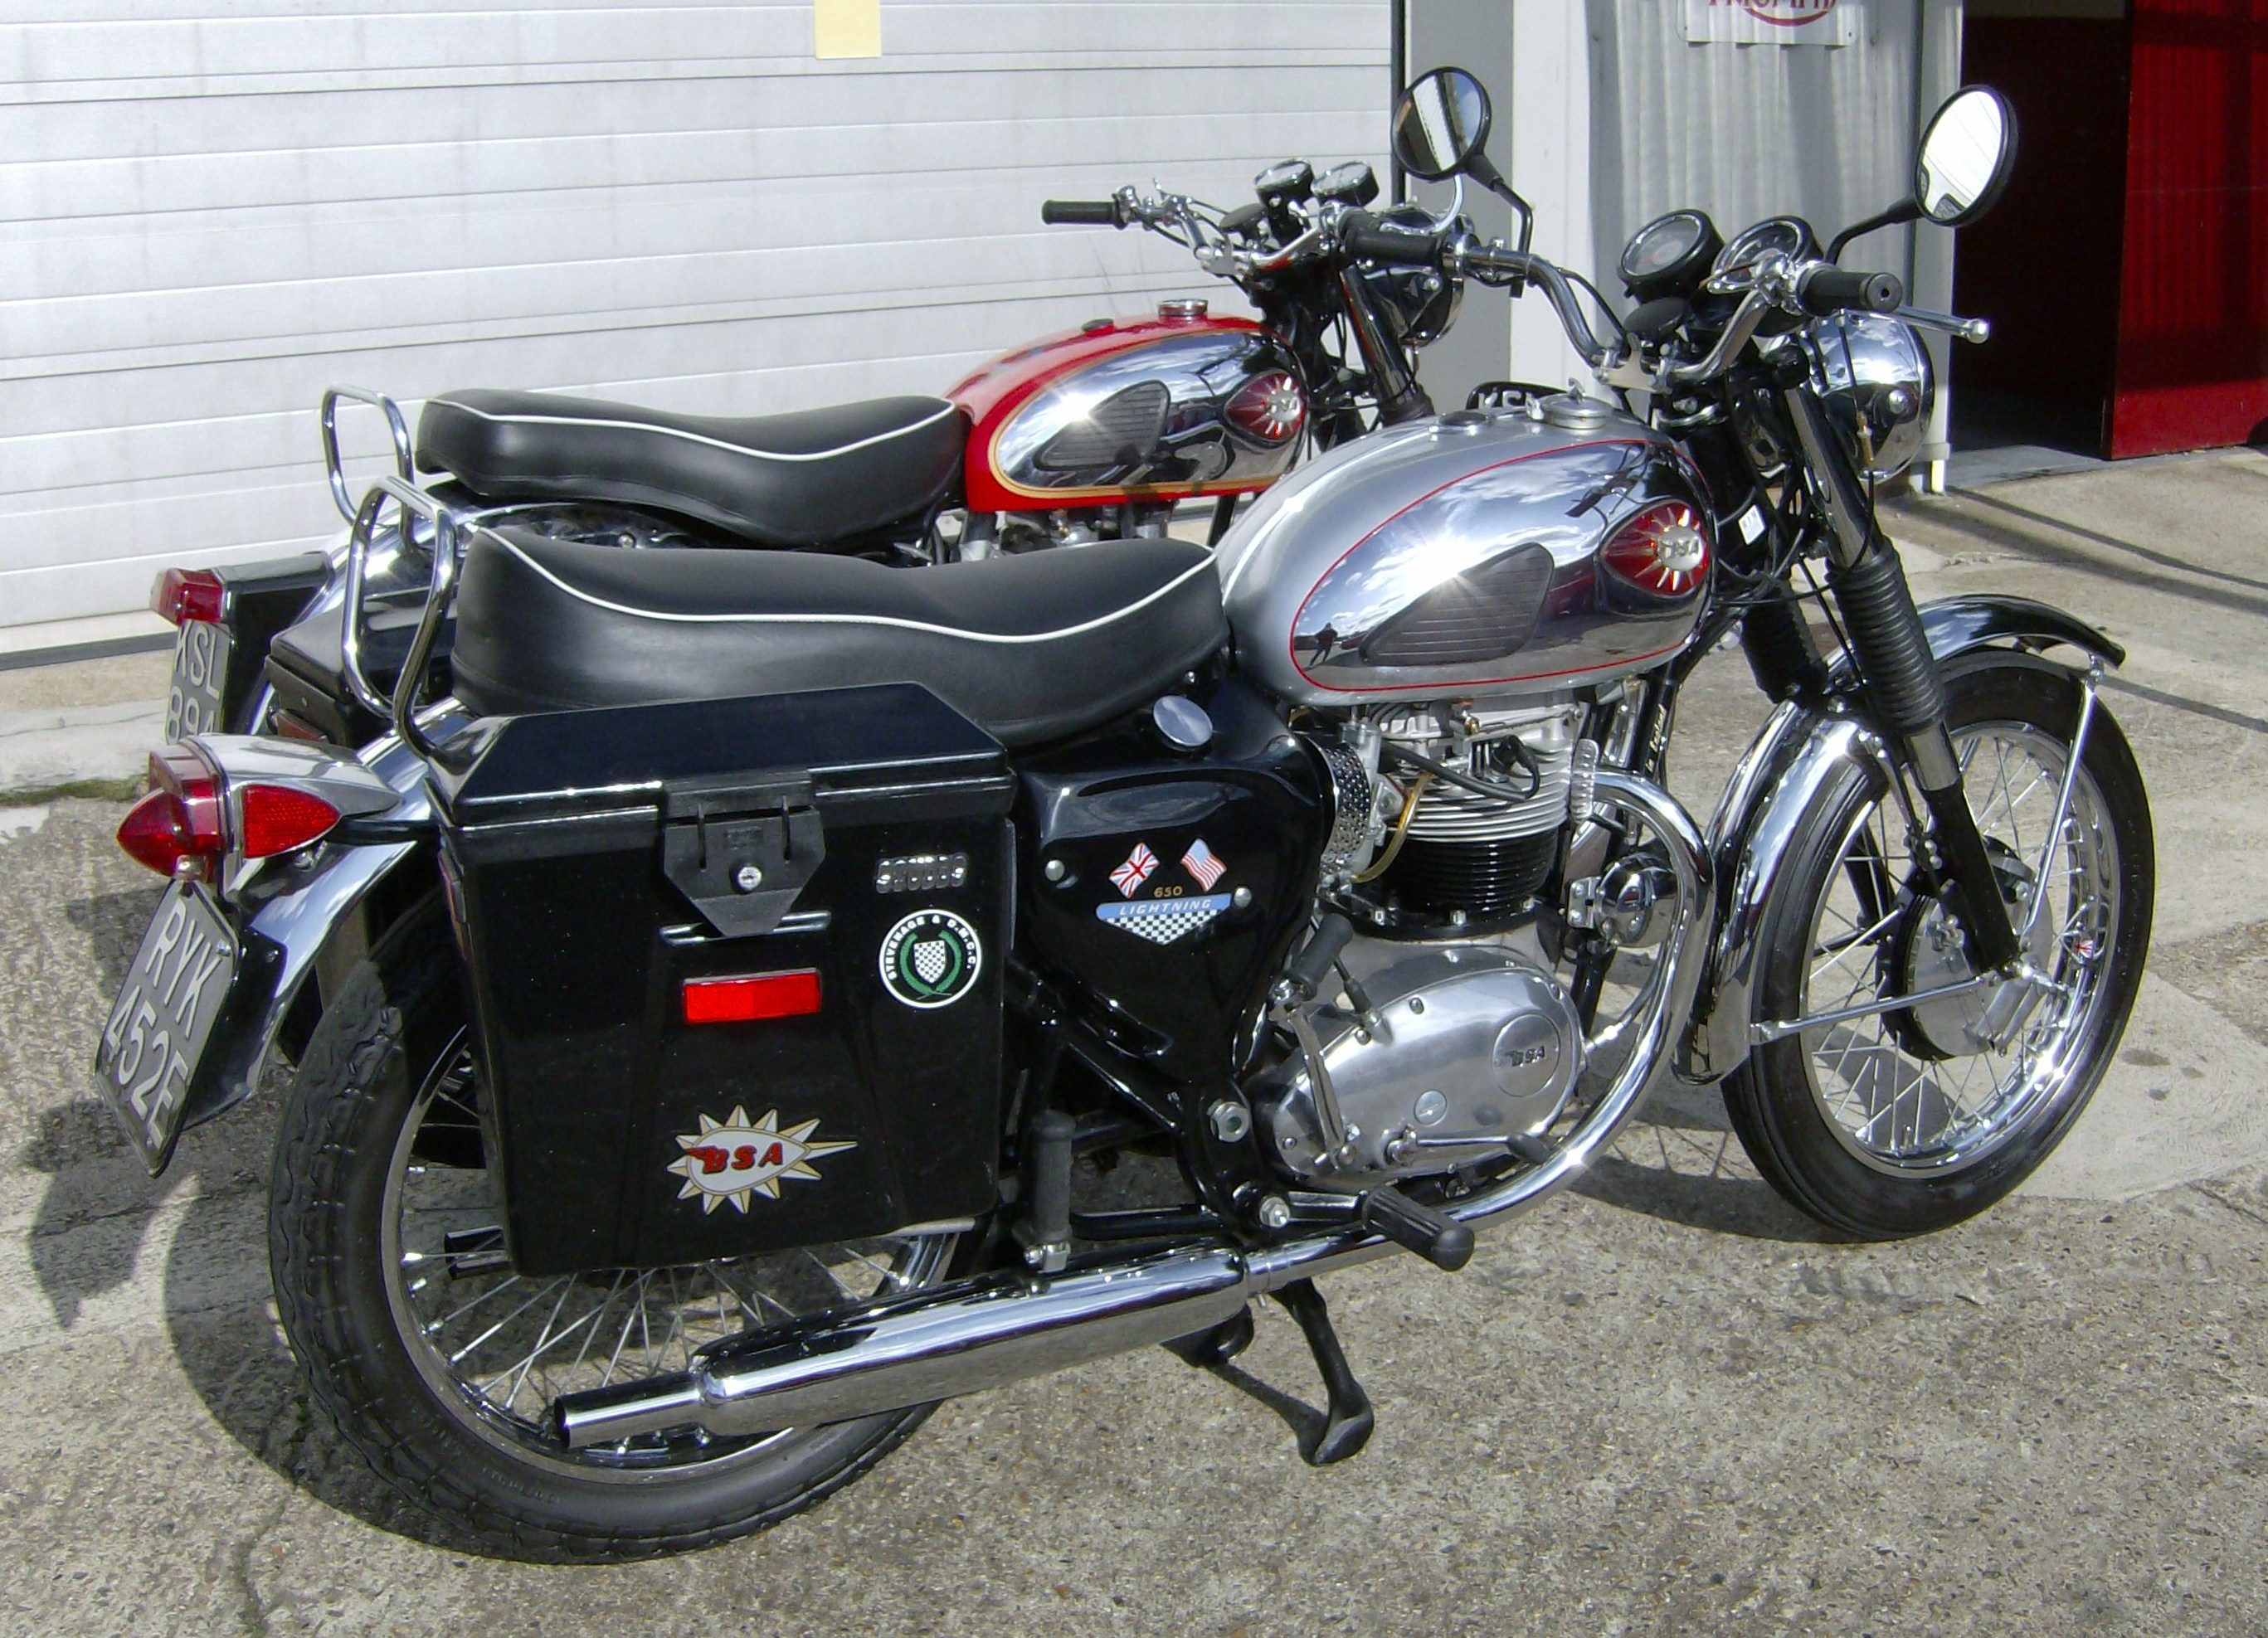 A pair of the smartest, most capable and hard working BSA twins I currently know of: A 1960 Road Rocket and a 1967 Lightning